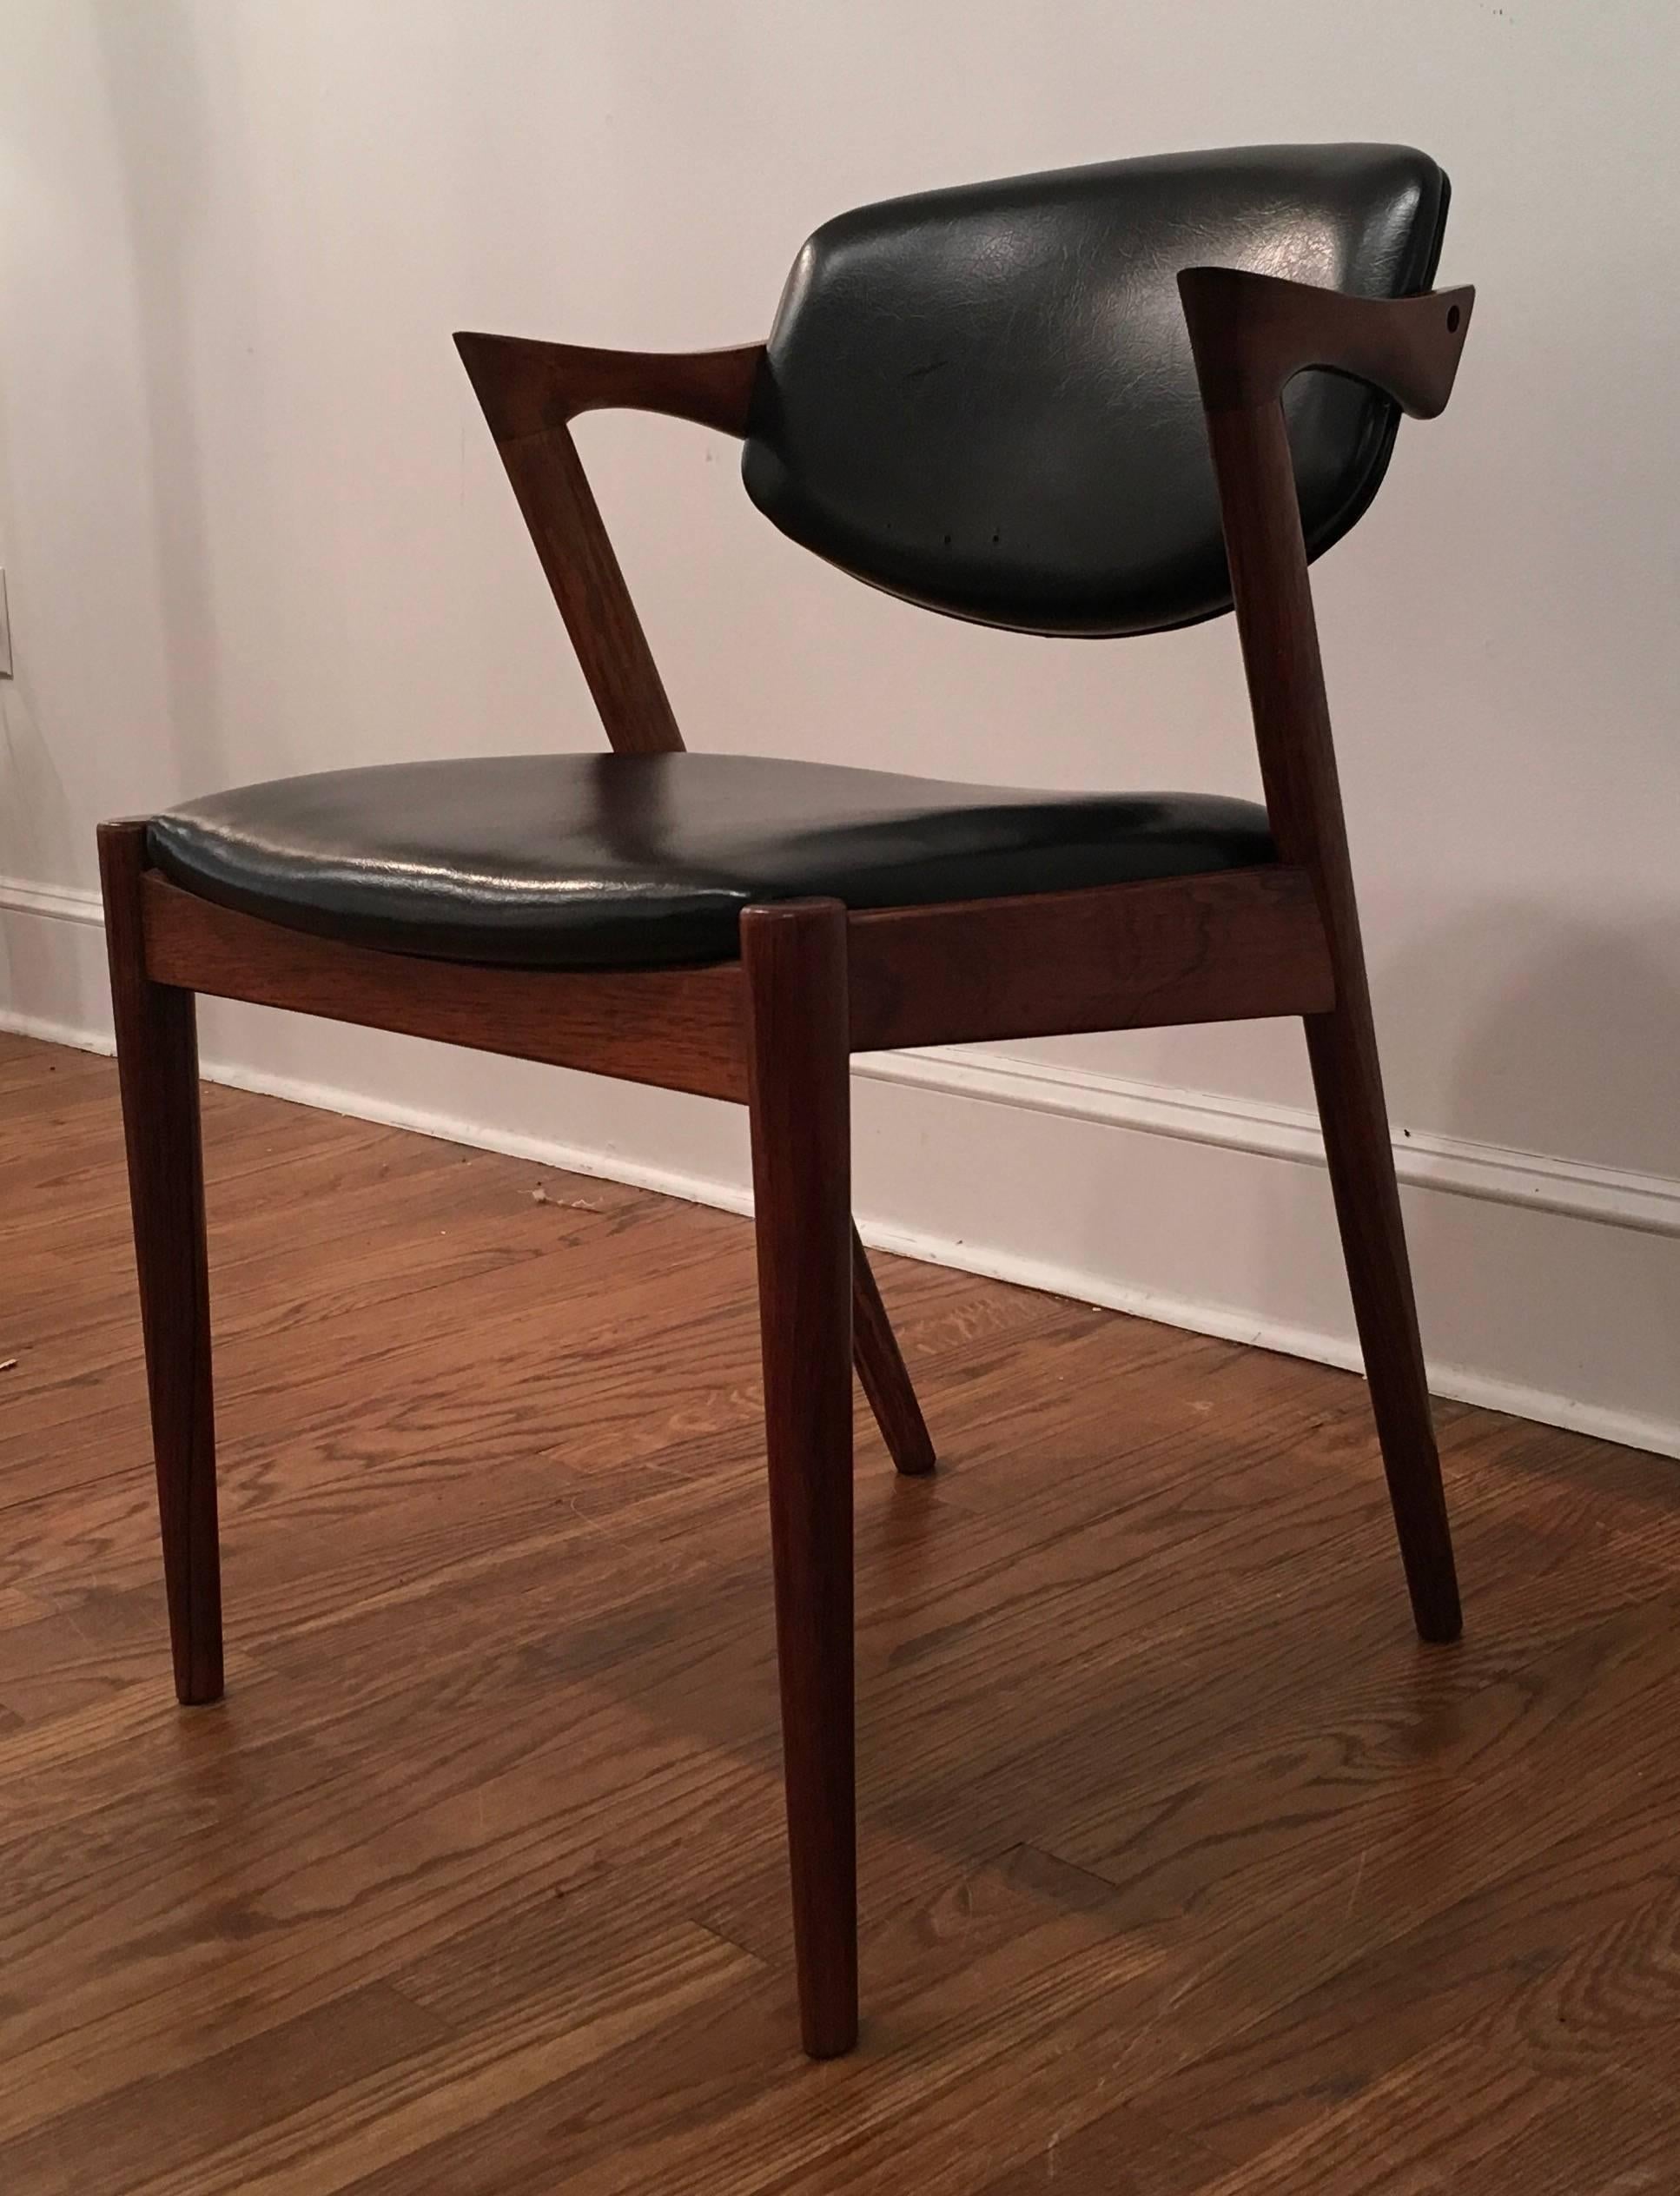 Rosewood chair by Kai Kristiansen. Made in Denmark, 1950's. The chair has a swivel back and adjusts angle for comfort. Perfect as a desk chair or as an occasional chair. Chair has been recently refinished.